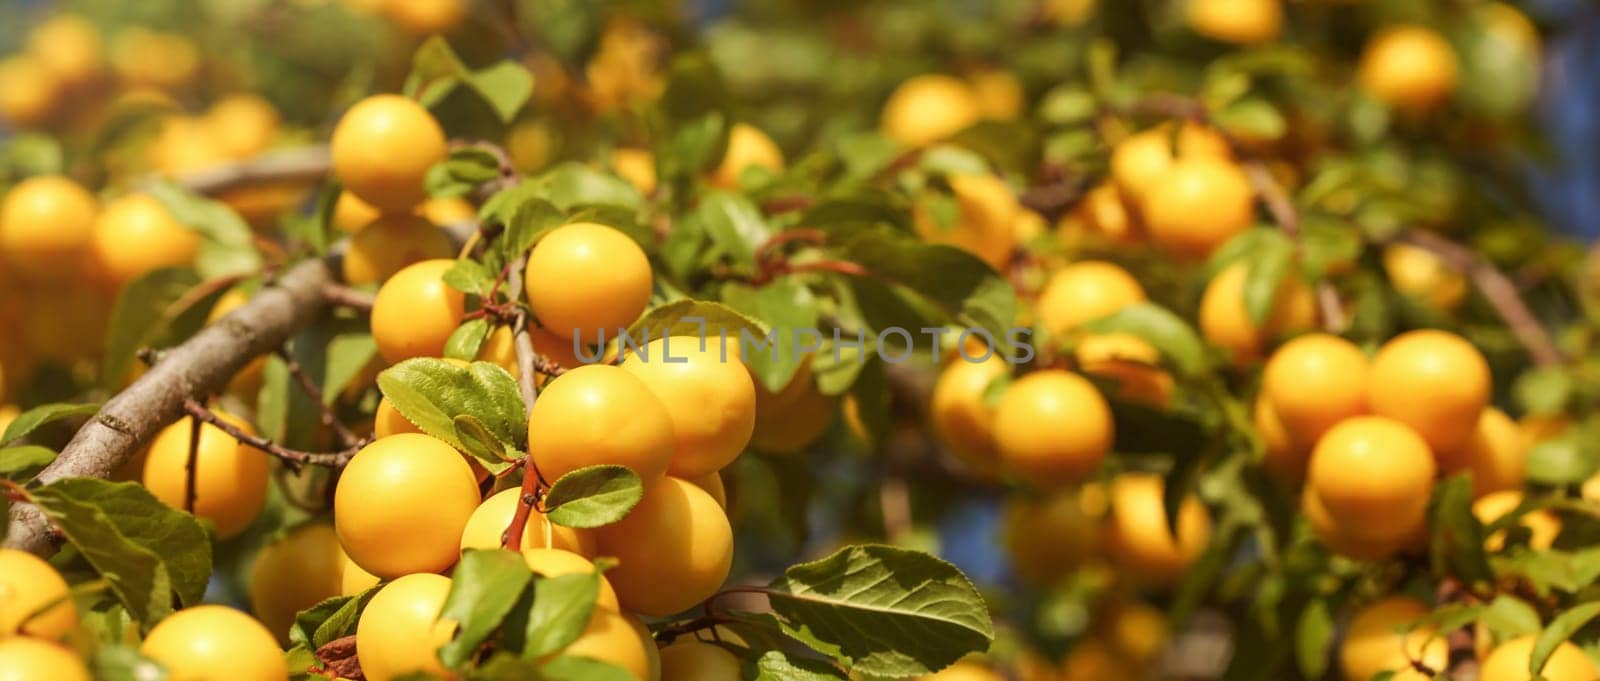 Ripe yellow mirabelle plums on ;eaves covered tree branches. (Prunus domestica syriaca) Wide banner. by Ivanko